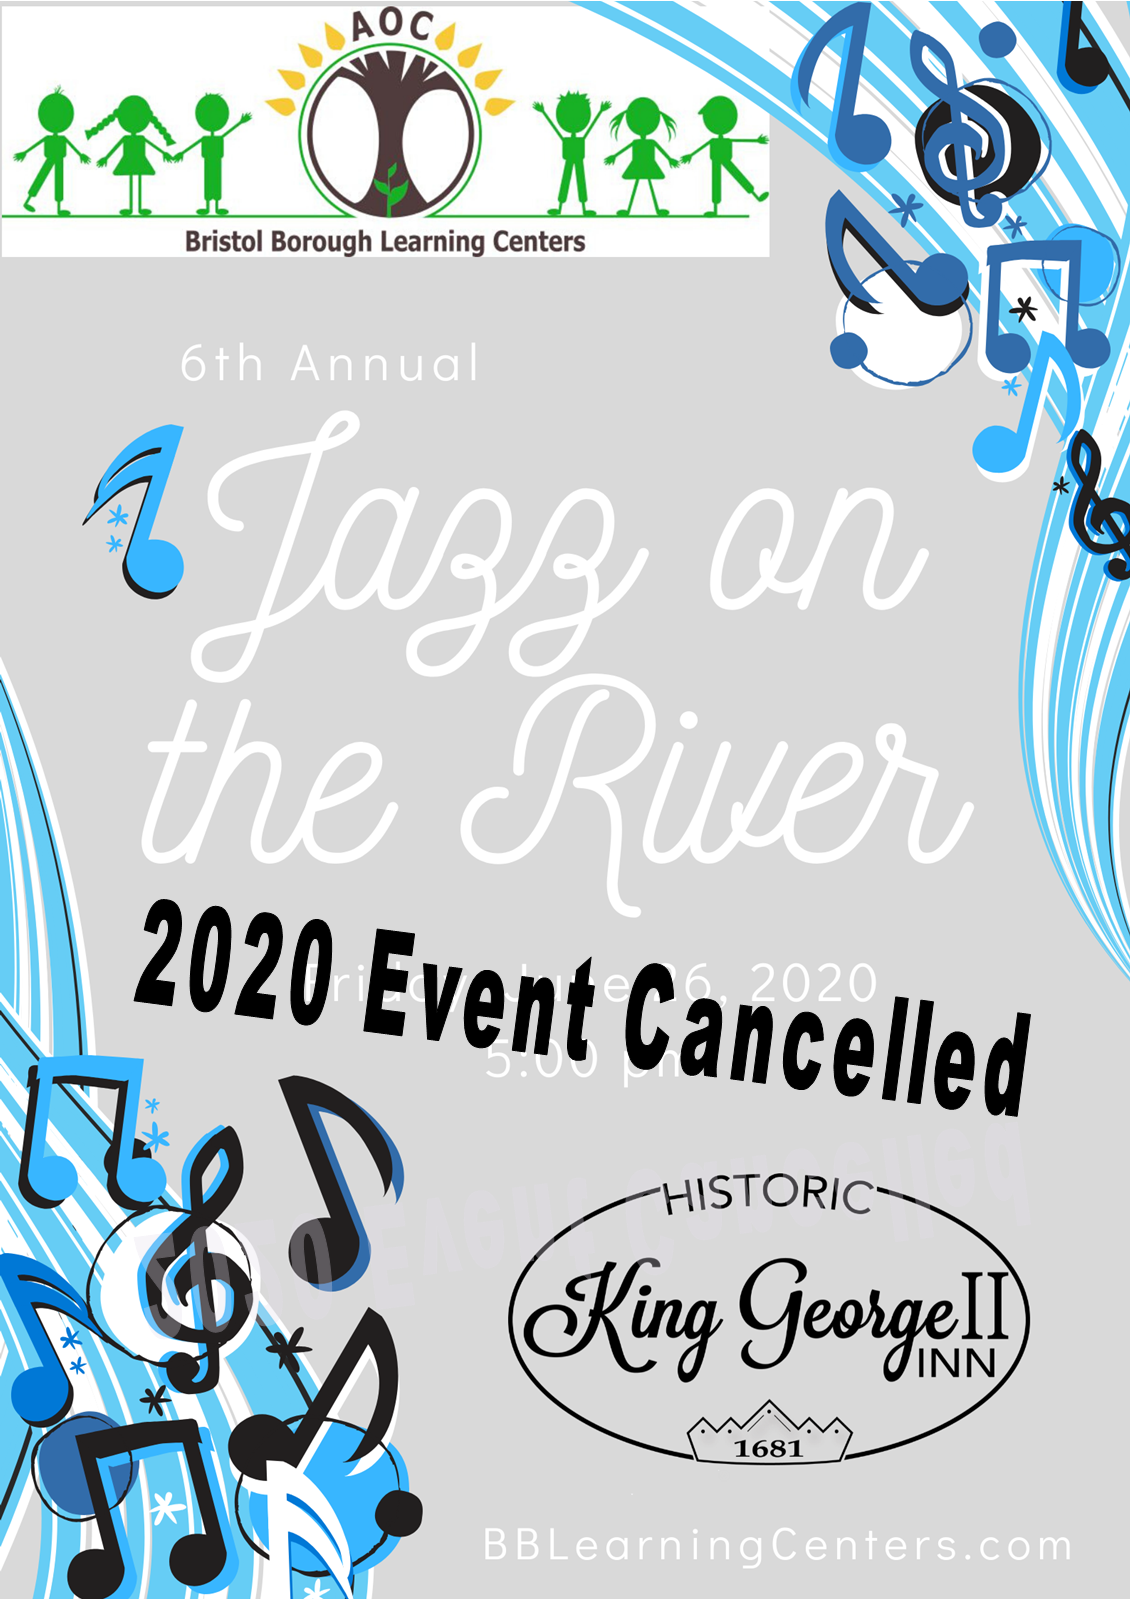 Jazz on the River